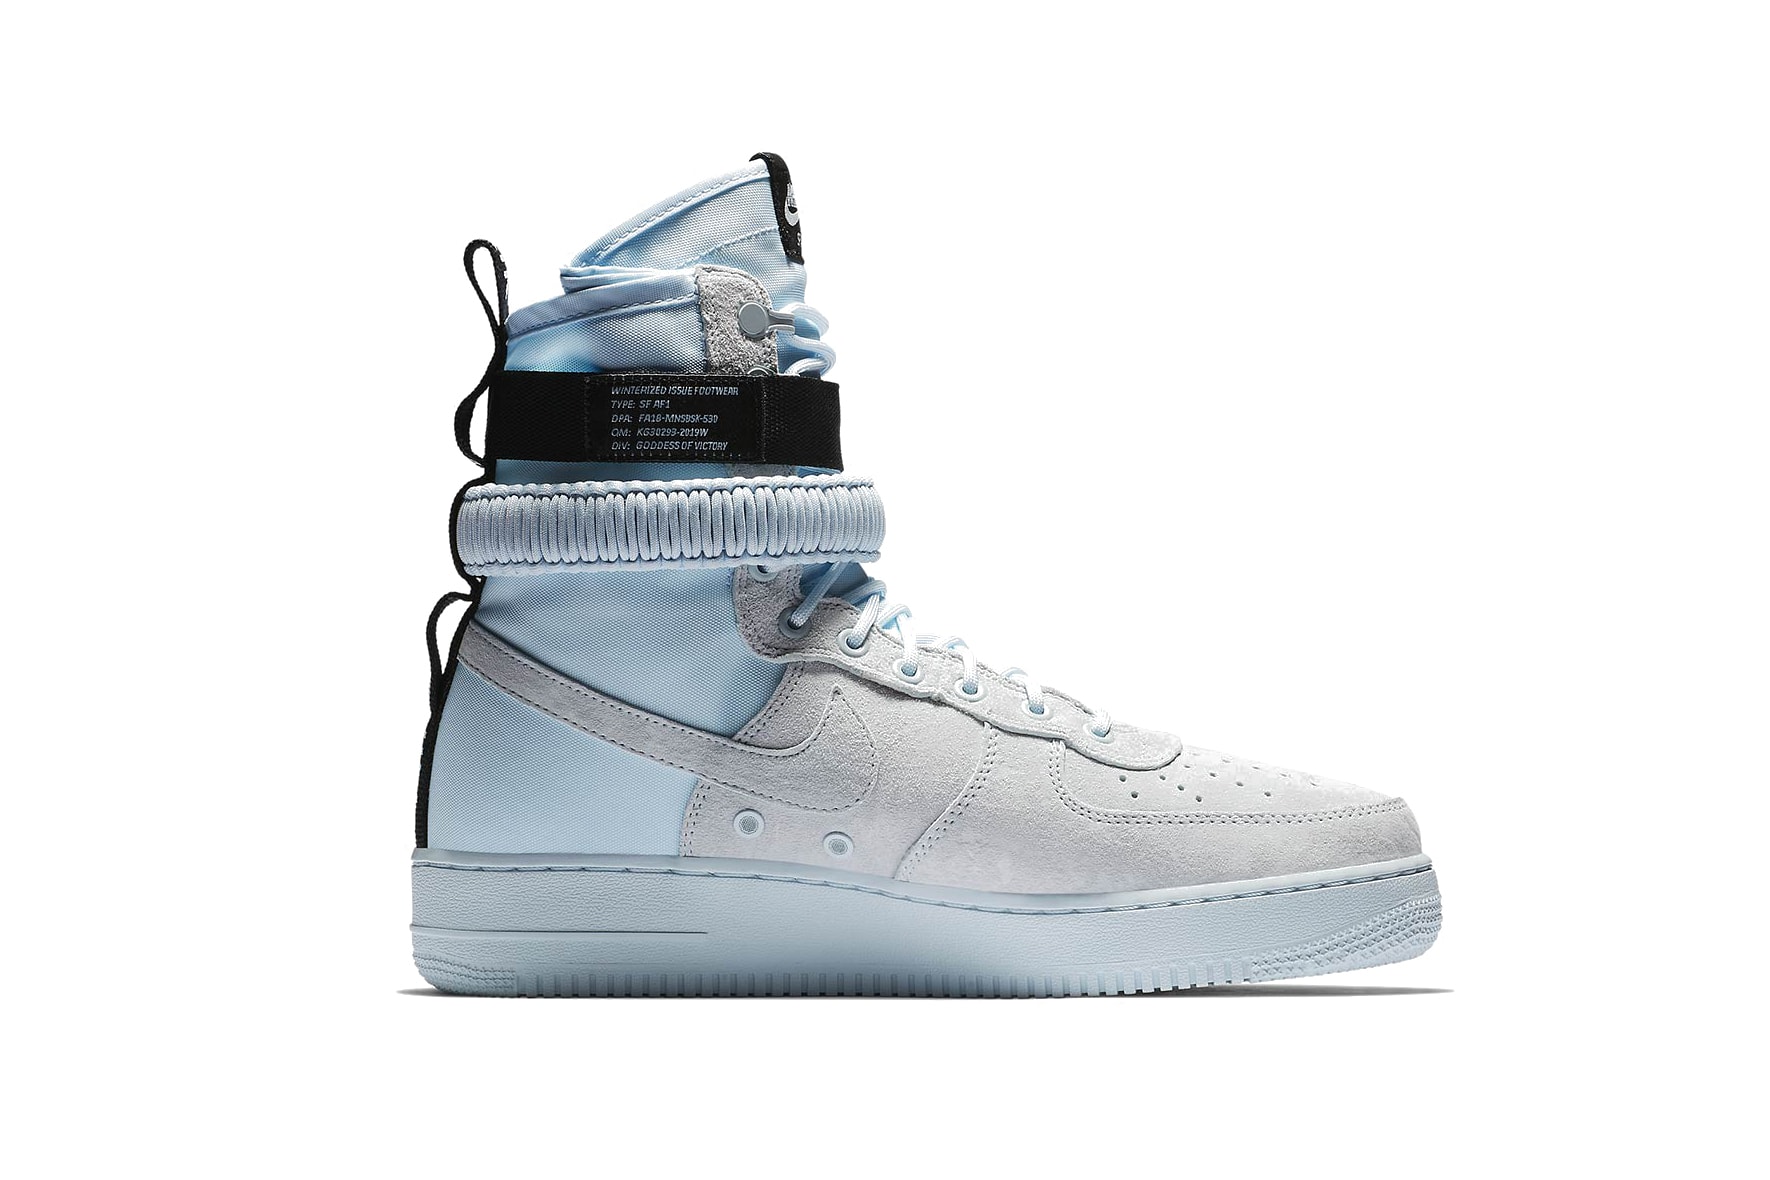 Nike SF Air Force 1 Releases 